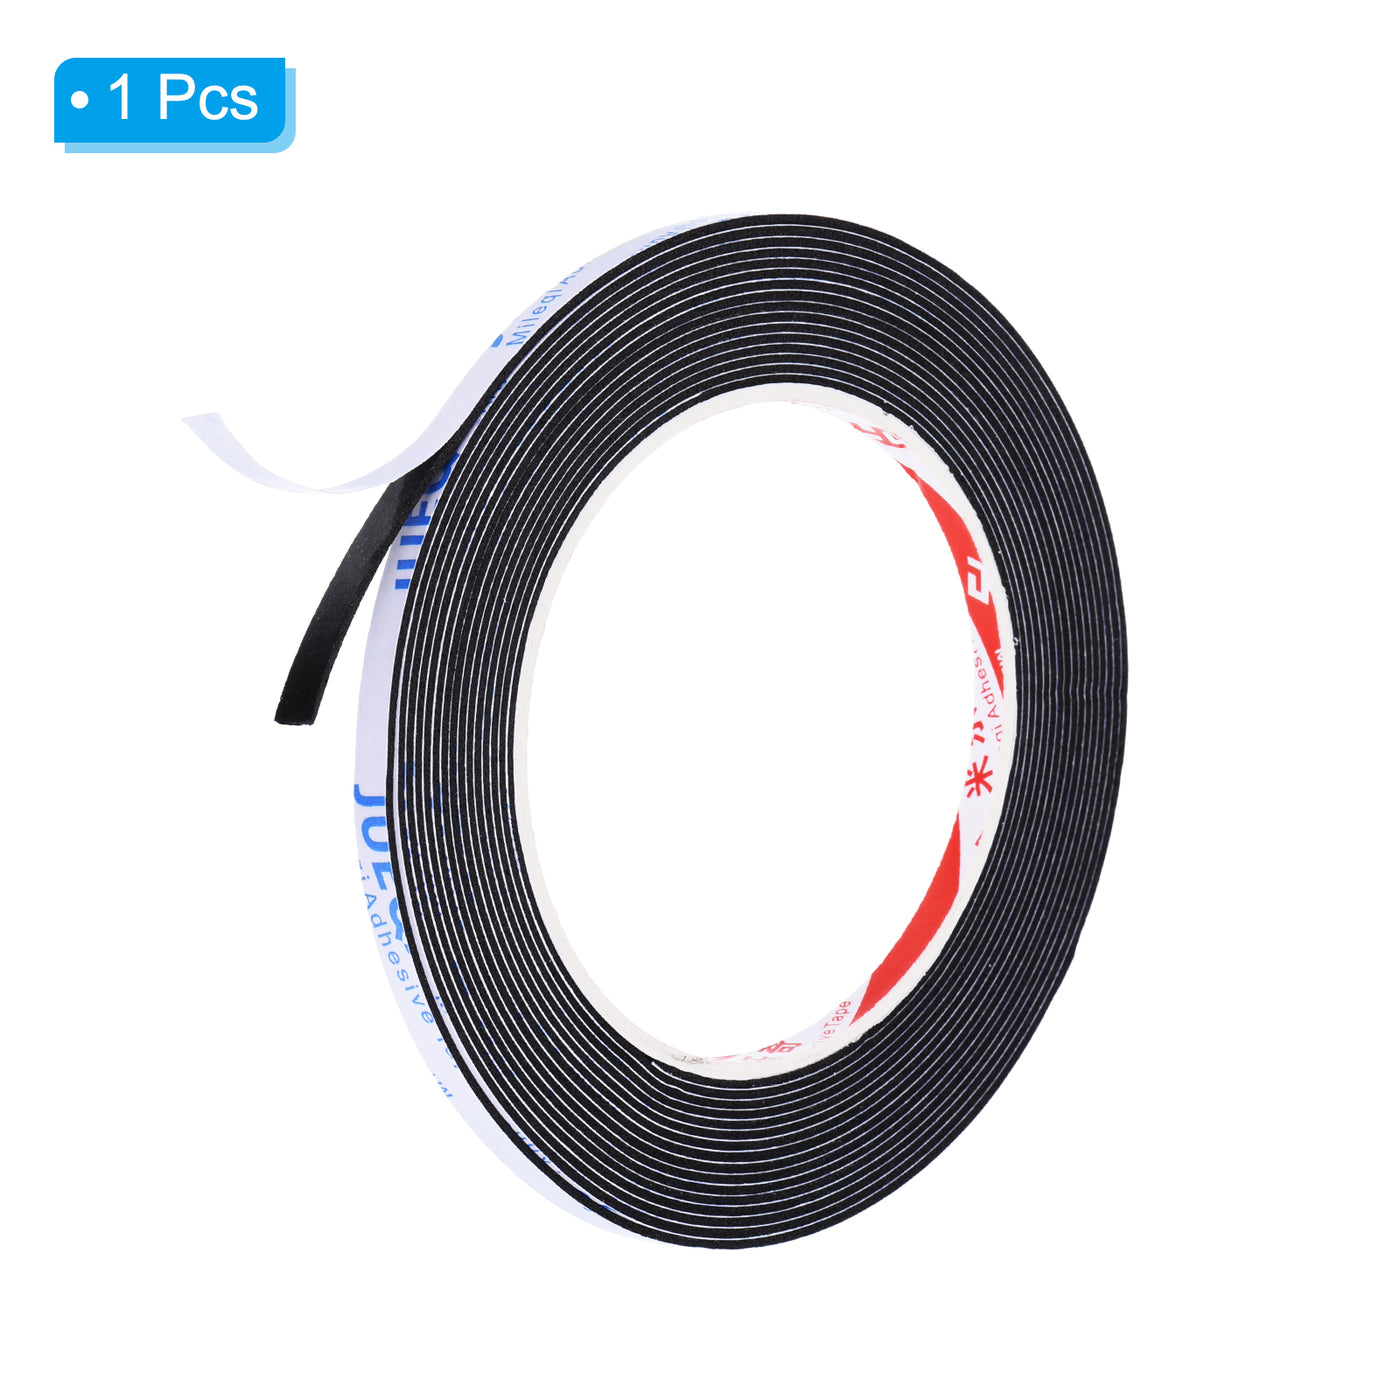 Harfington 5m/16.4ft Sealing Foam Tape, 5mm Wide 1mm Thick Single Sided Weather Stripping Door Seal Strip for Window Door Insulation, Black